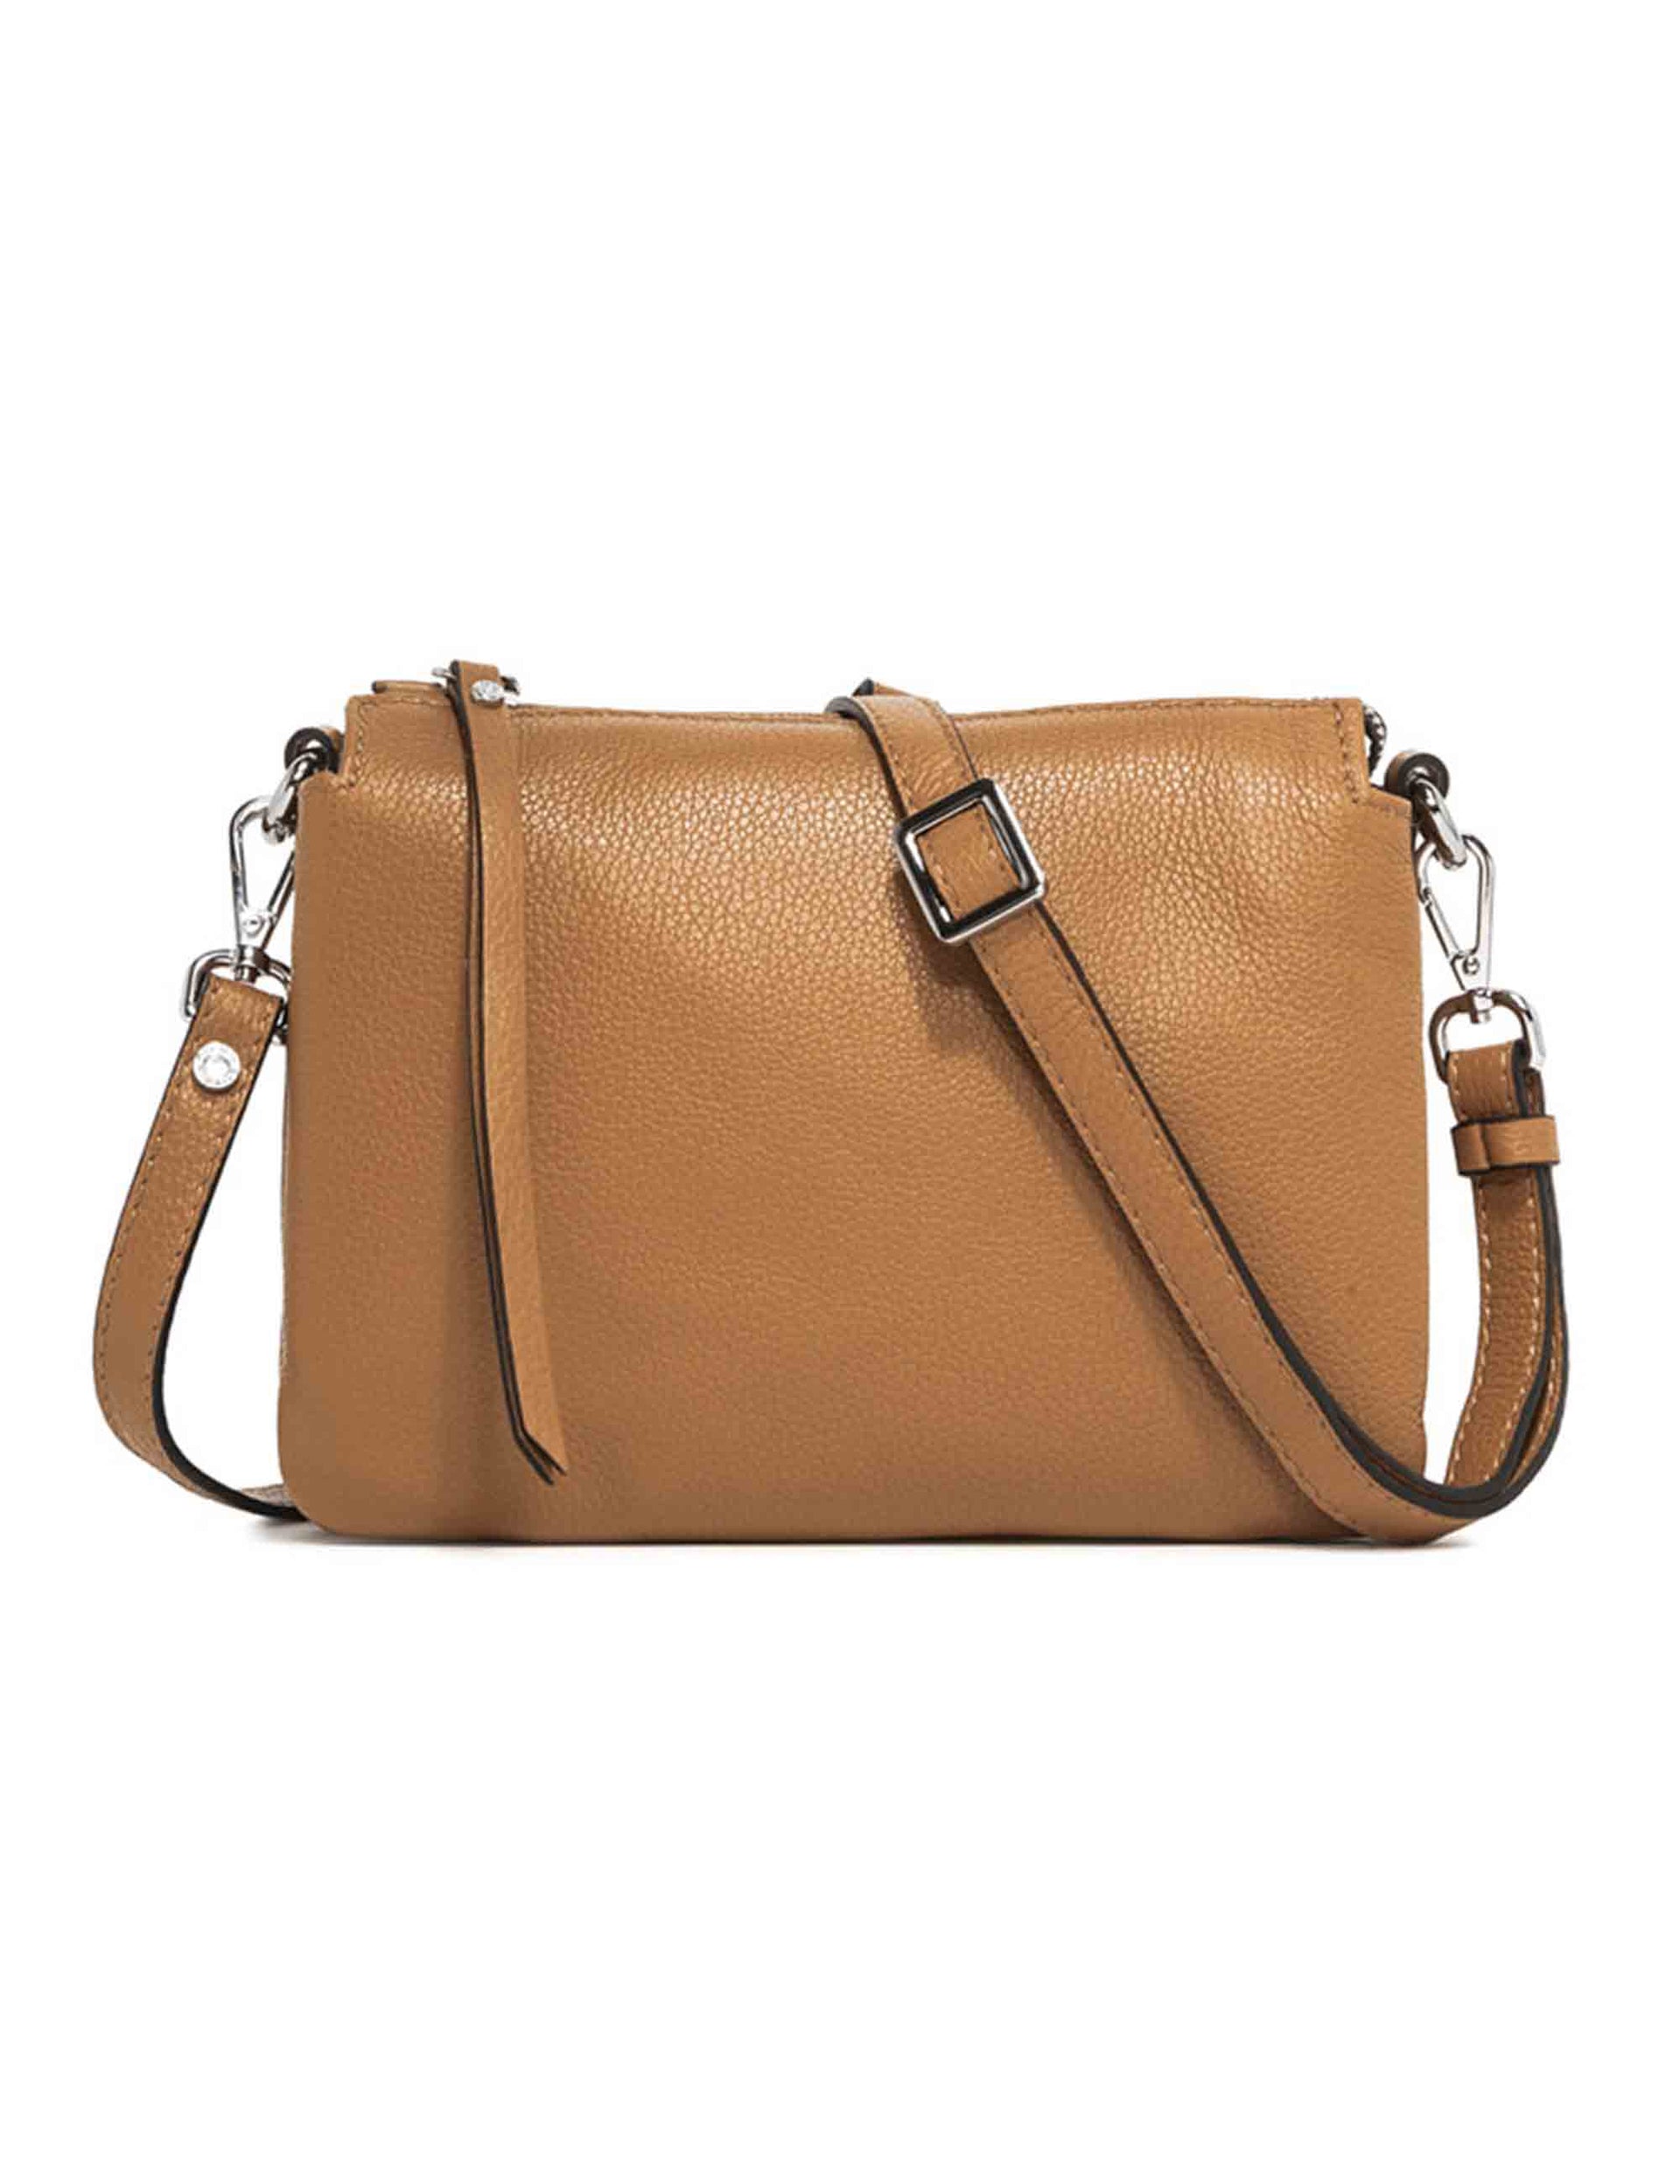 Three women's clutch bags in natural leather with matching removable shoulder strap